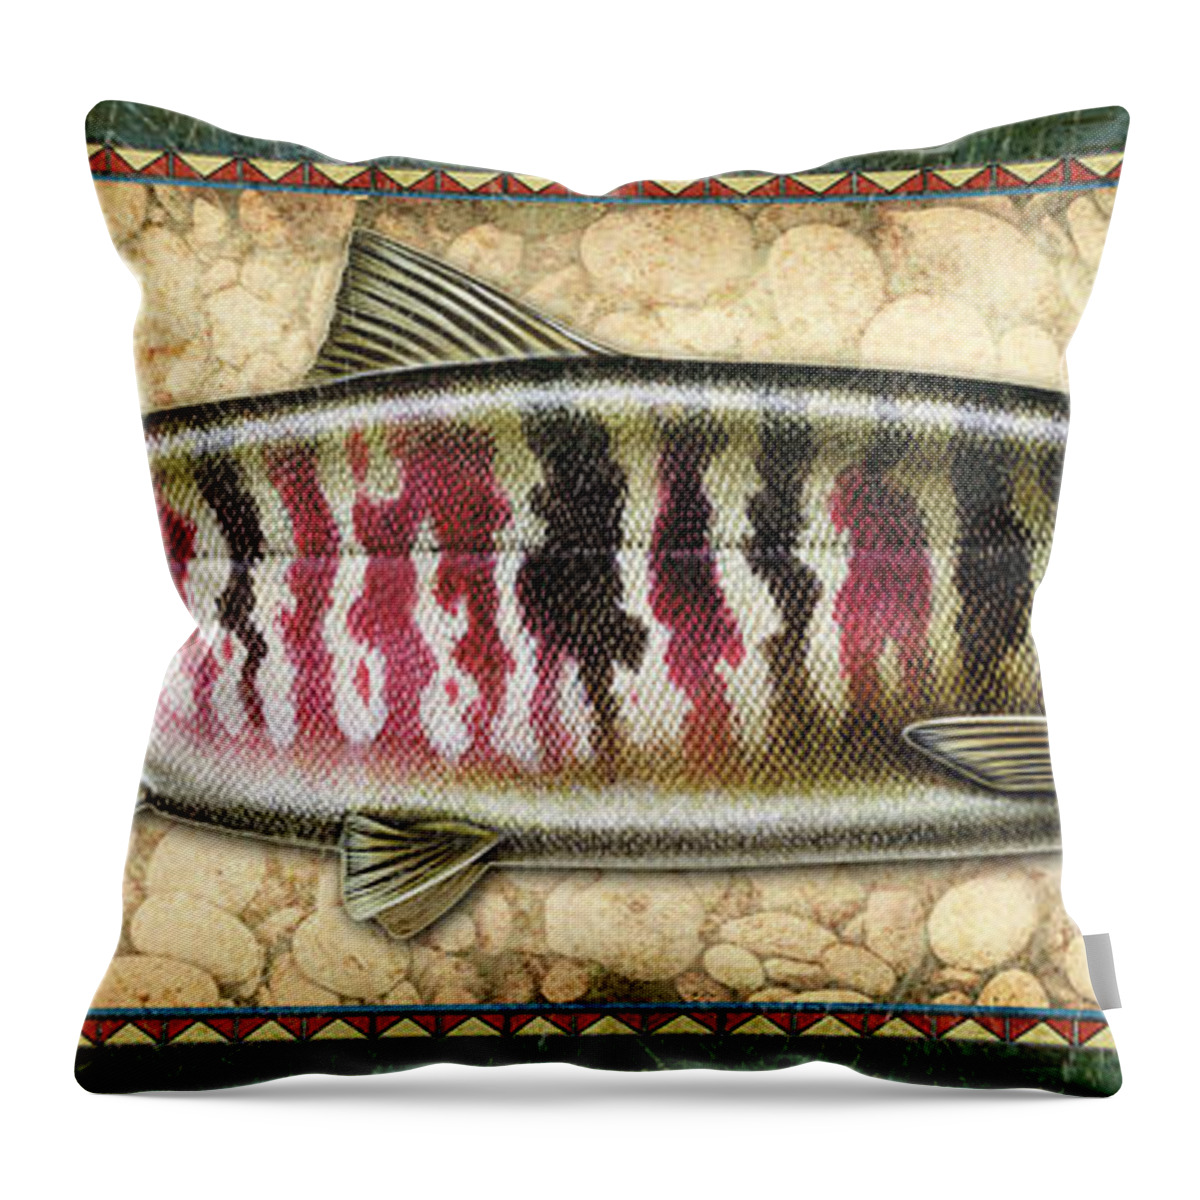 Chum Throw Pillow featuring the painting Chum Salmon Spawning Pahse by JQ Licensing